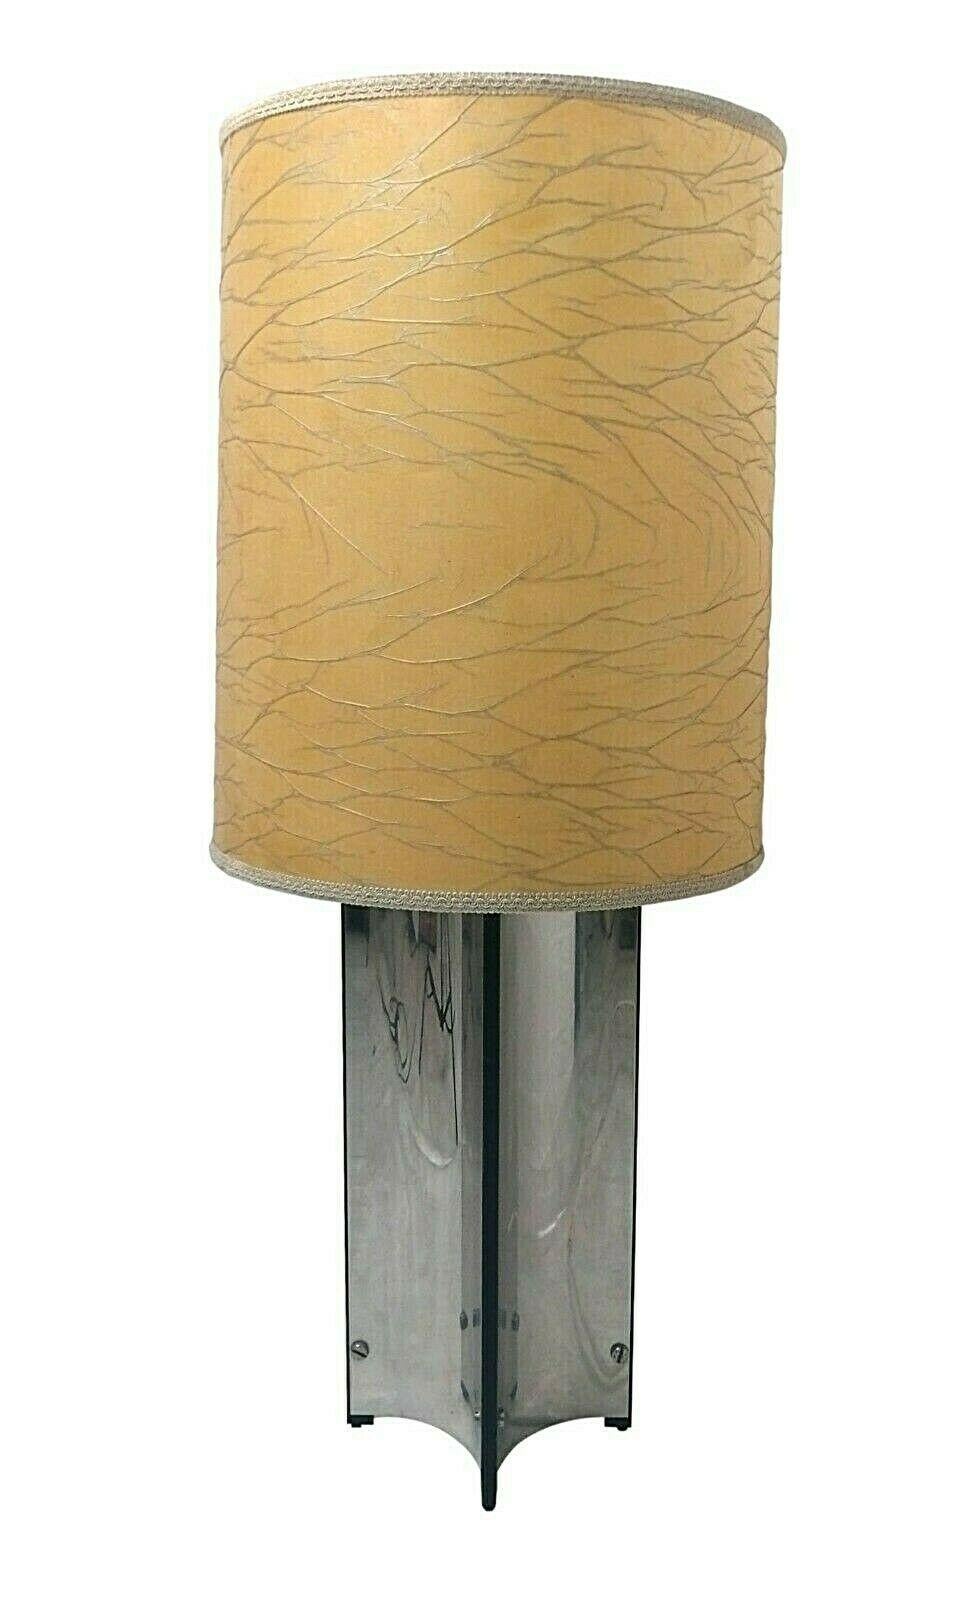 A floor lamp, 1970s, original production Sciolari, made of curved steel sheets on four sides

the lamp was found in a closed store, is still equipped with its original tag, retains only a few obvious signs of time

measures just over 80